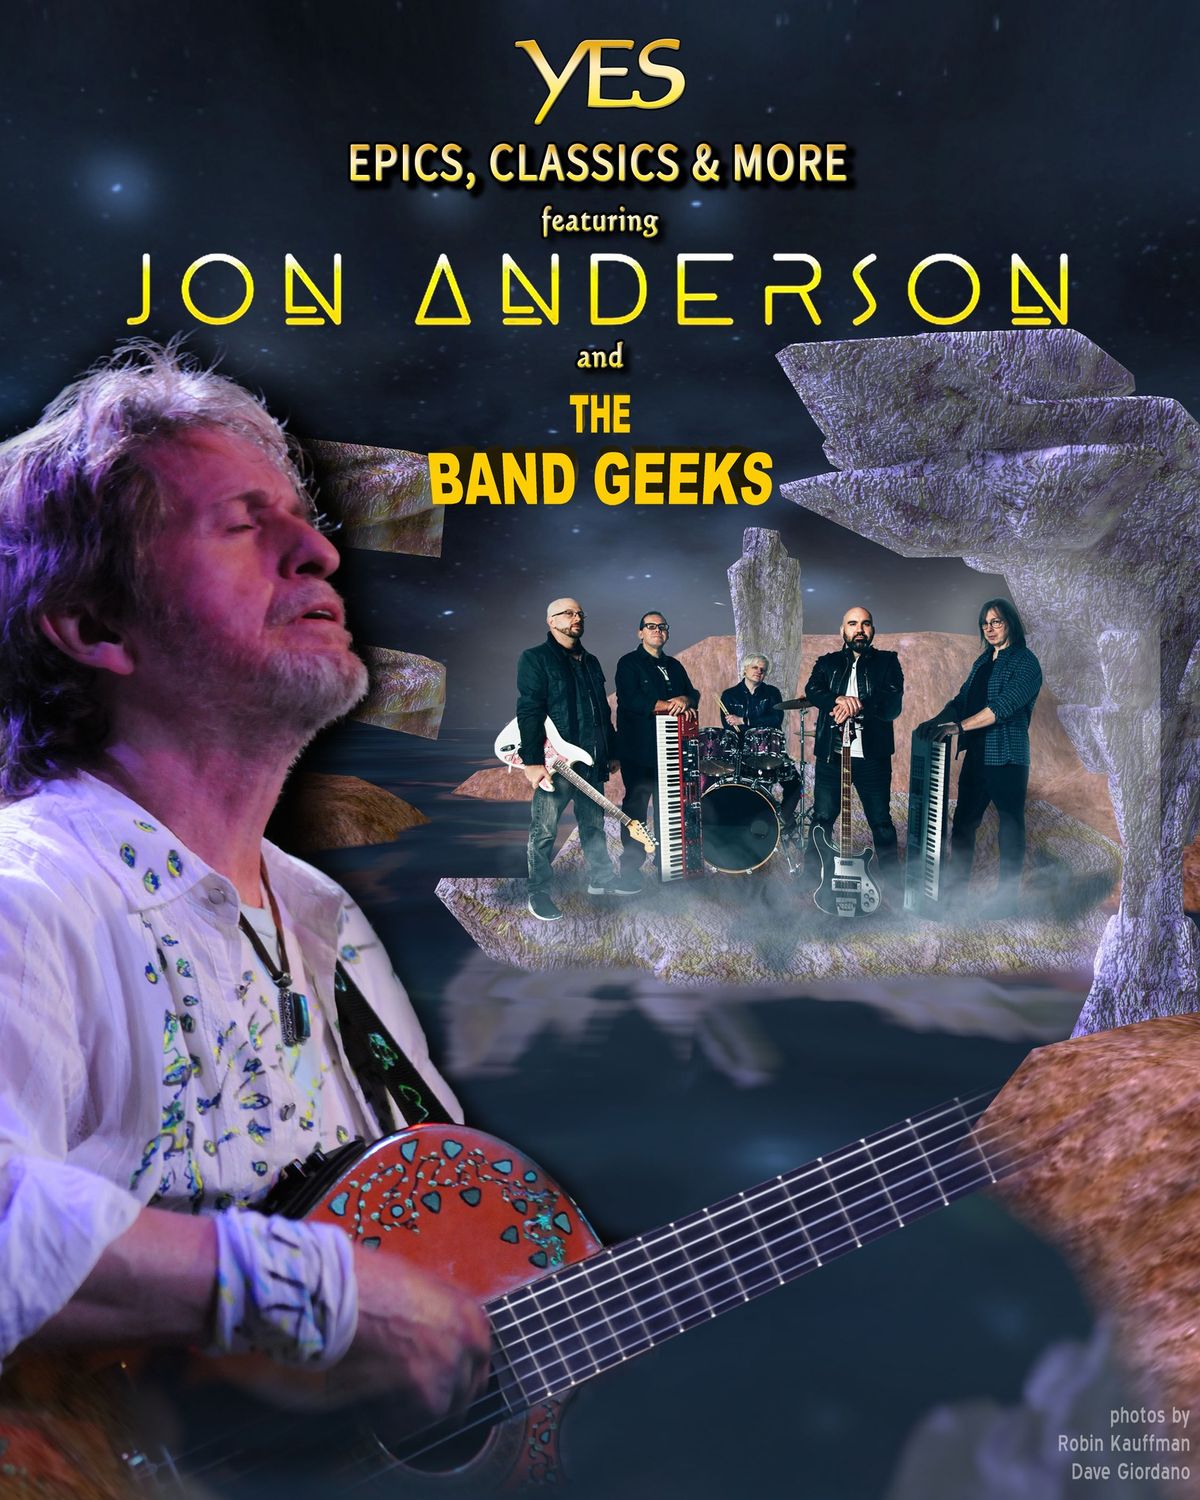 Yes: Epics, Classics & More Featuring Jon Anderson and the Band Geeks